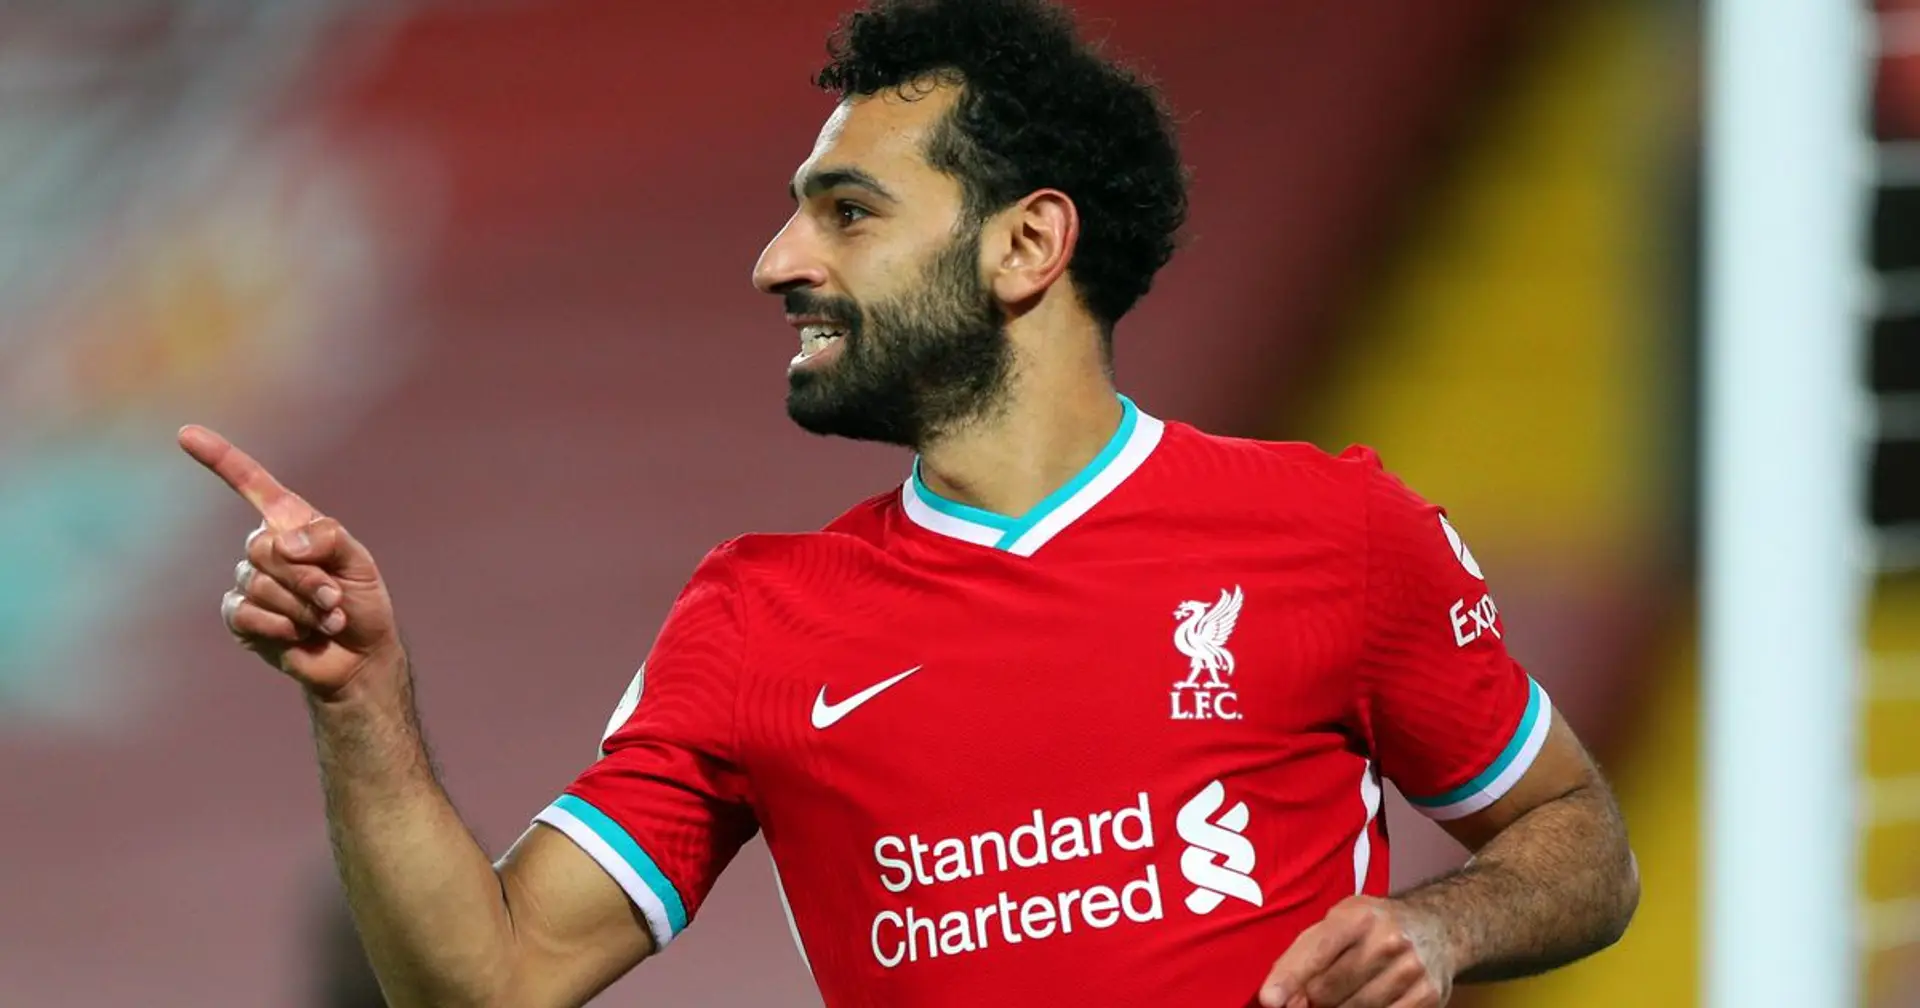 Salah selected for PFA Team of the Year & 3 more big stories at Liverpool you might've missed